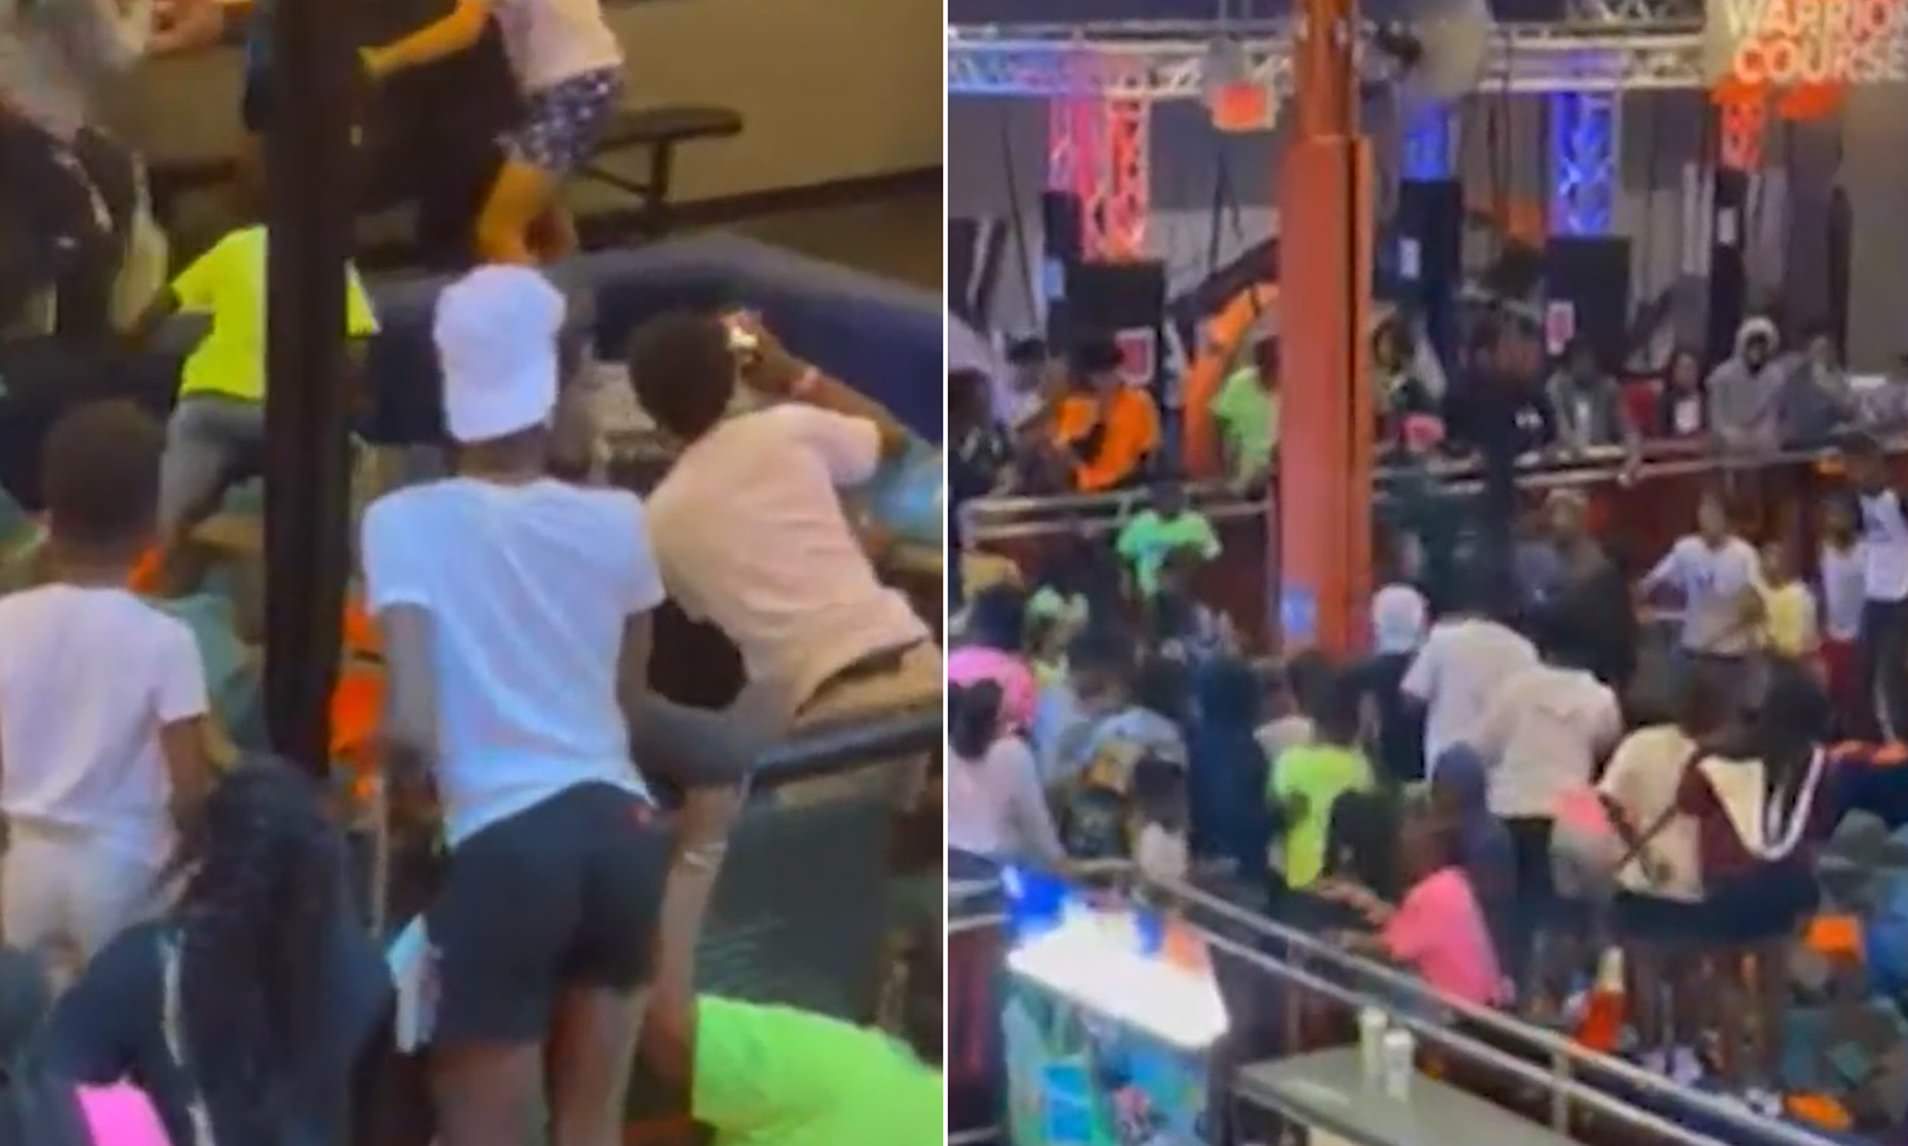 Hundreds Of Children Embroiled In Mass Brawl At Trampoline Park